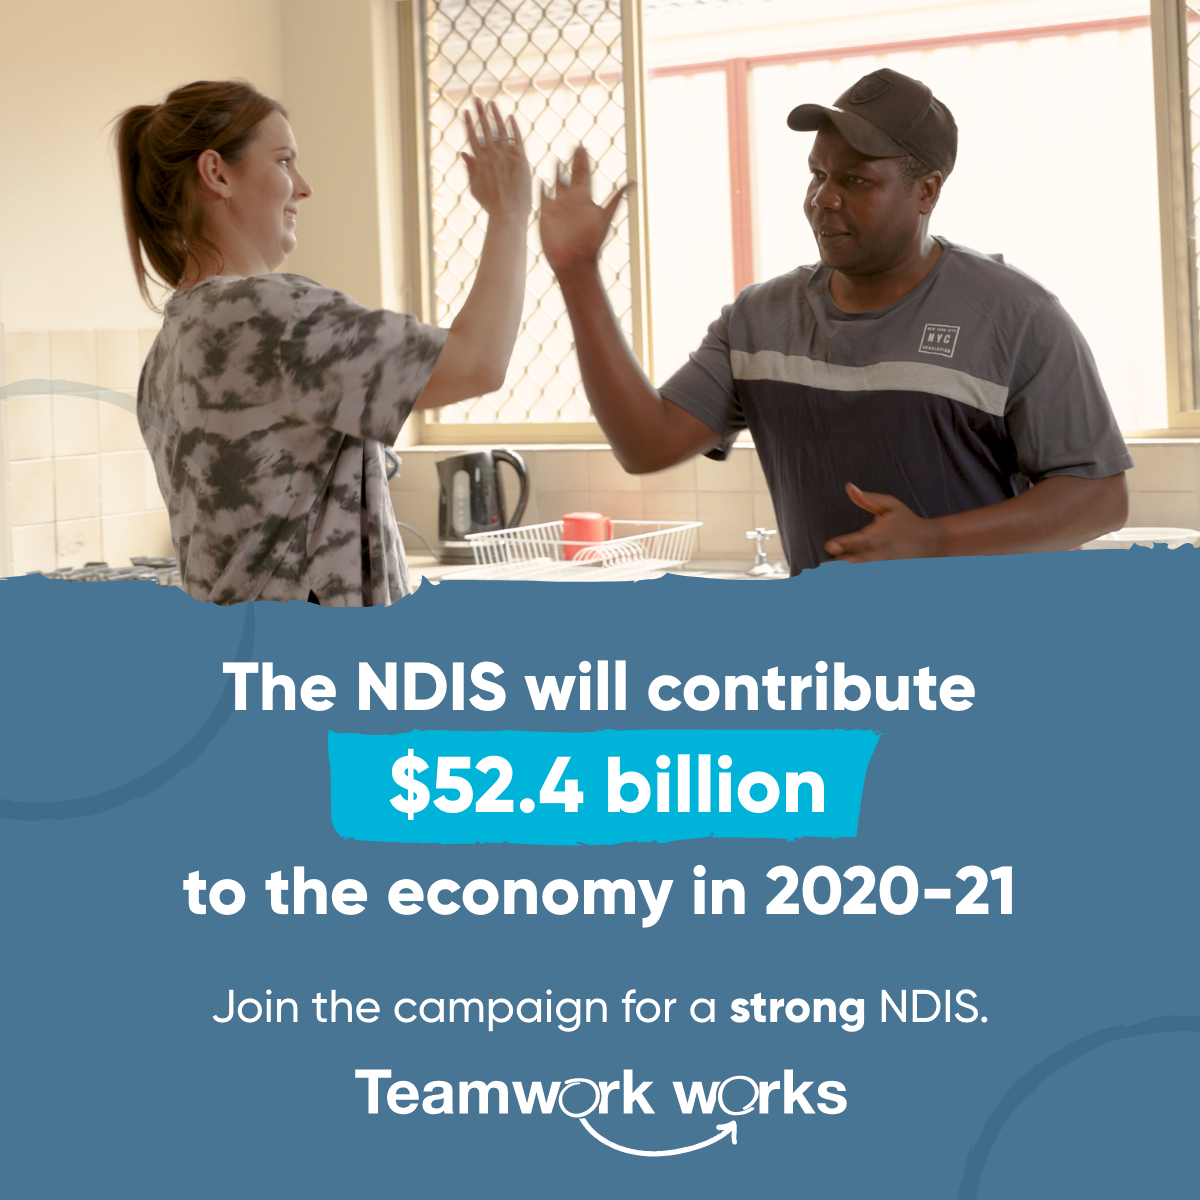 Facebook sharegraphic image with Rogers and his support worker with text: The NDIS will contribute $52.4 billion to the economy in 2020-21. Join the campaign for a strong NDIS.